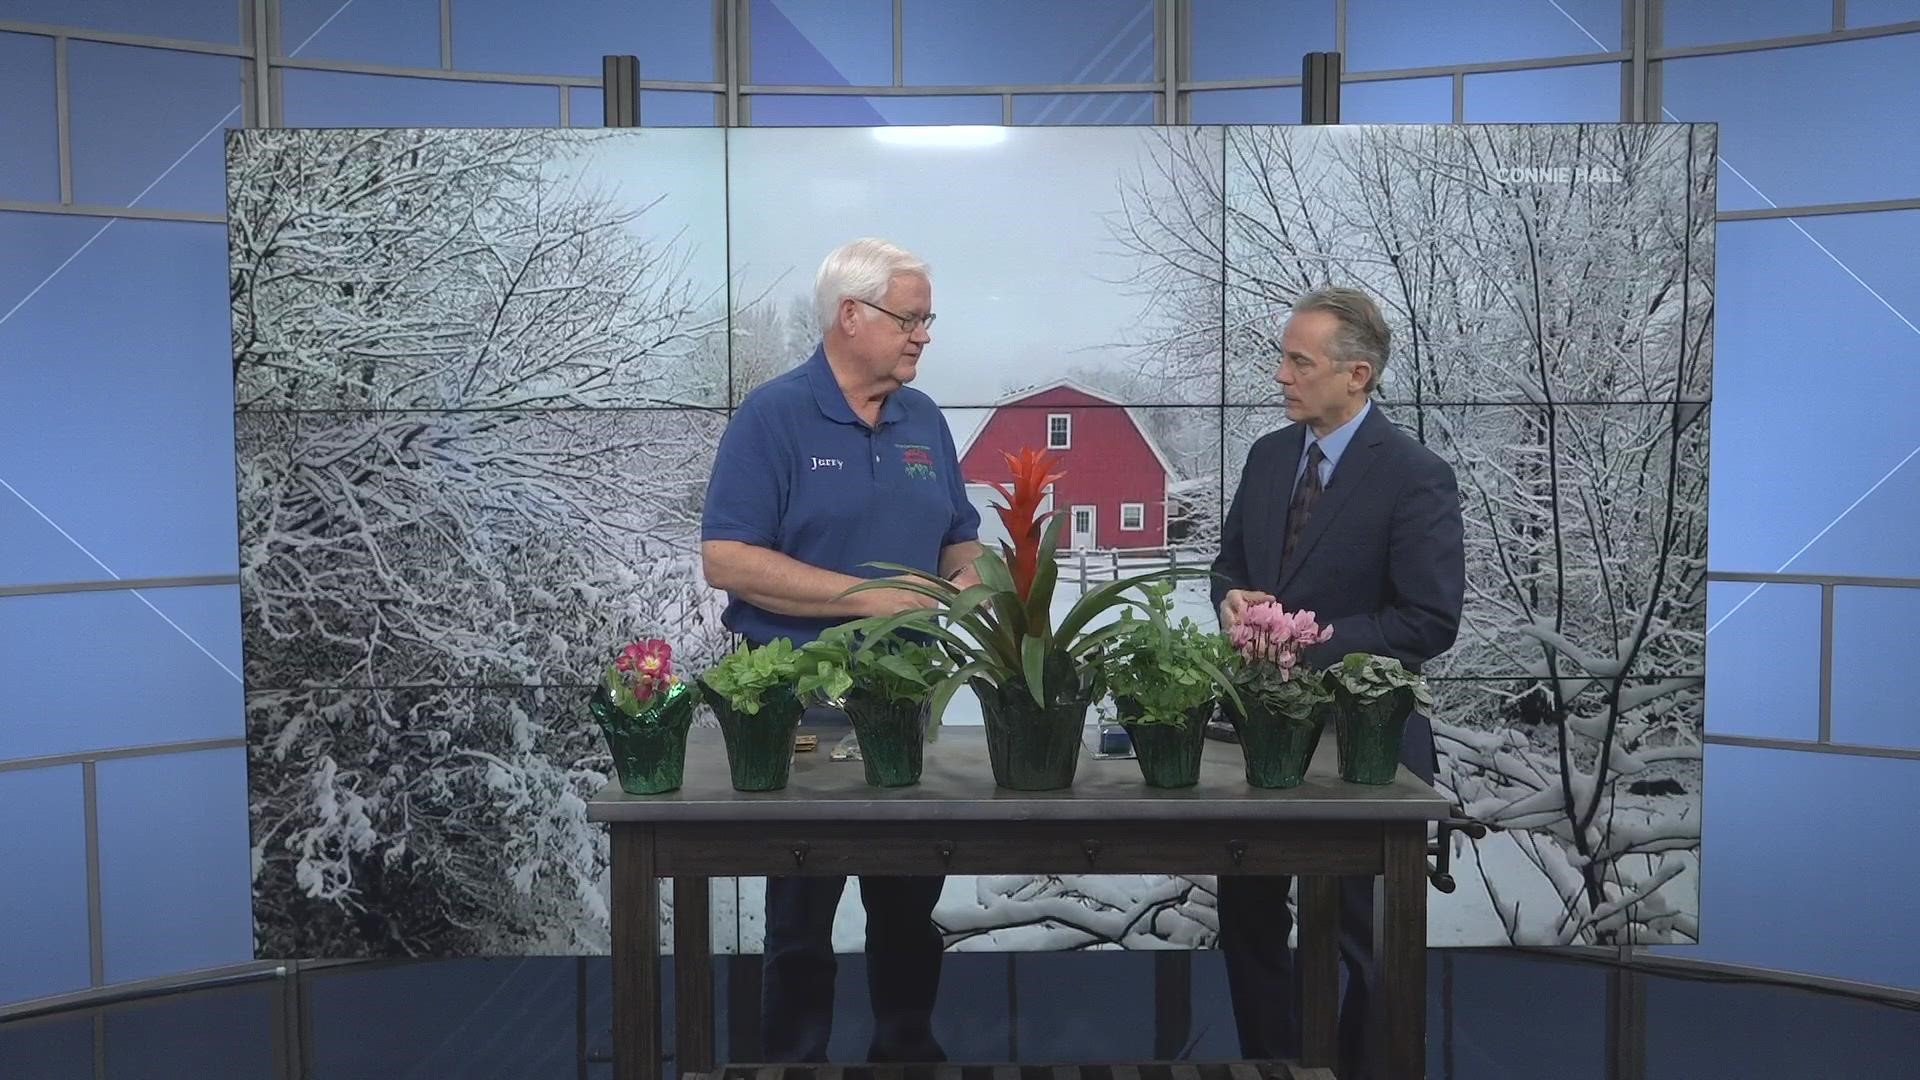 Jerry Holub of Holub Greenhouses joins Local 5 to discuss houseplants and hot peppers.